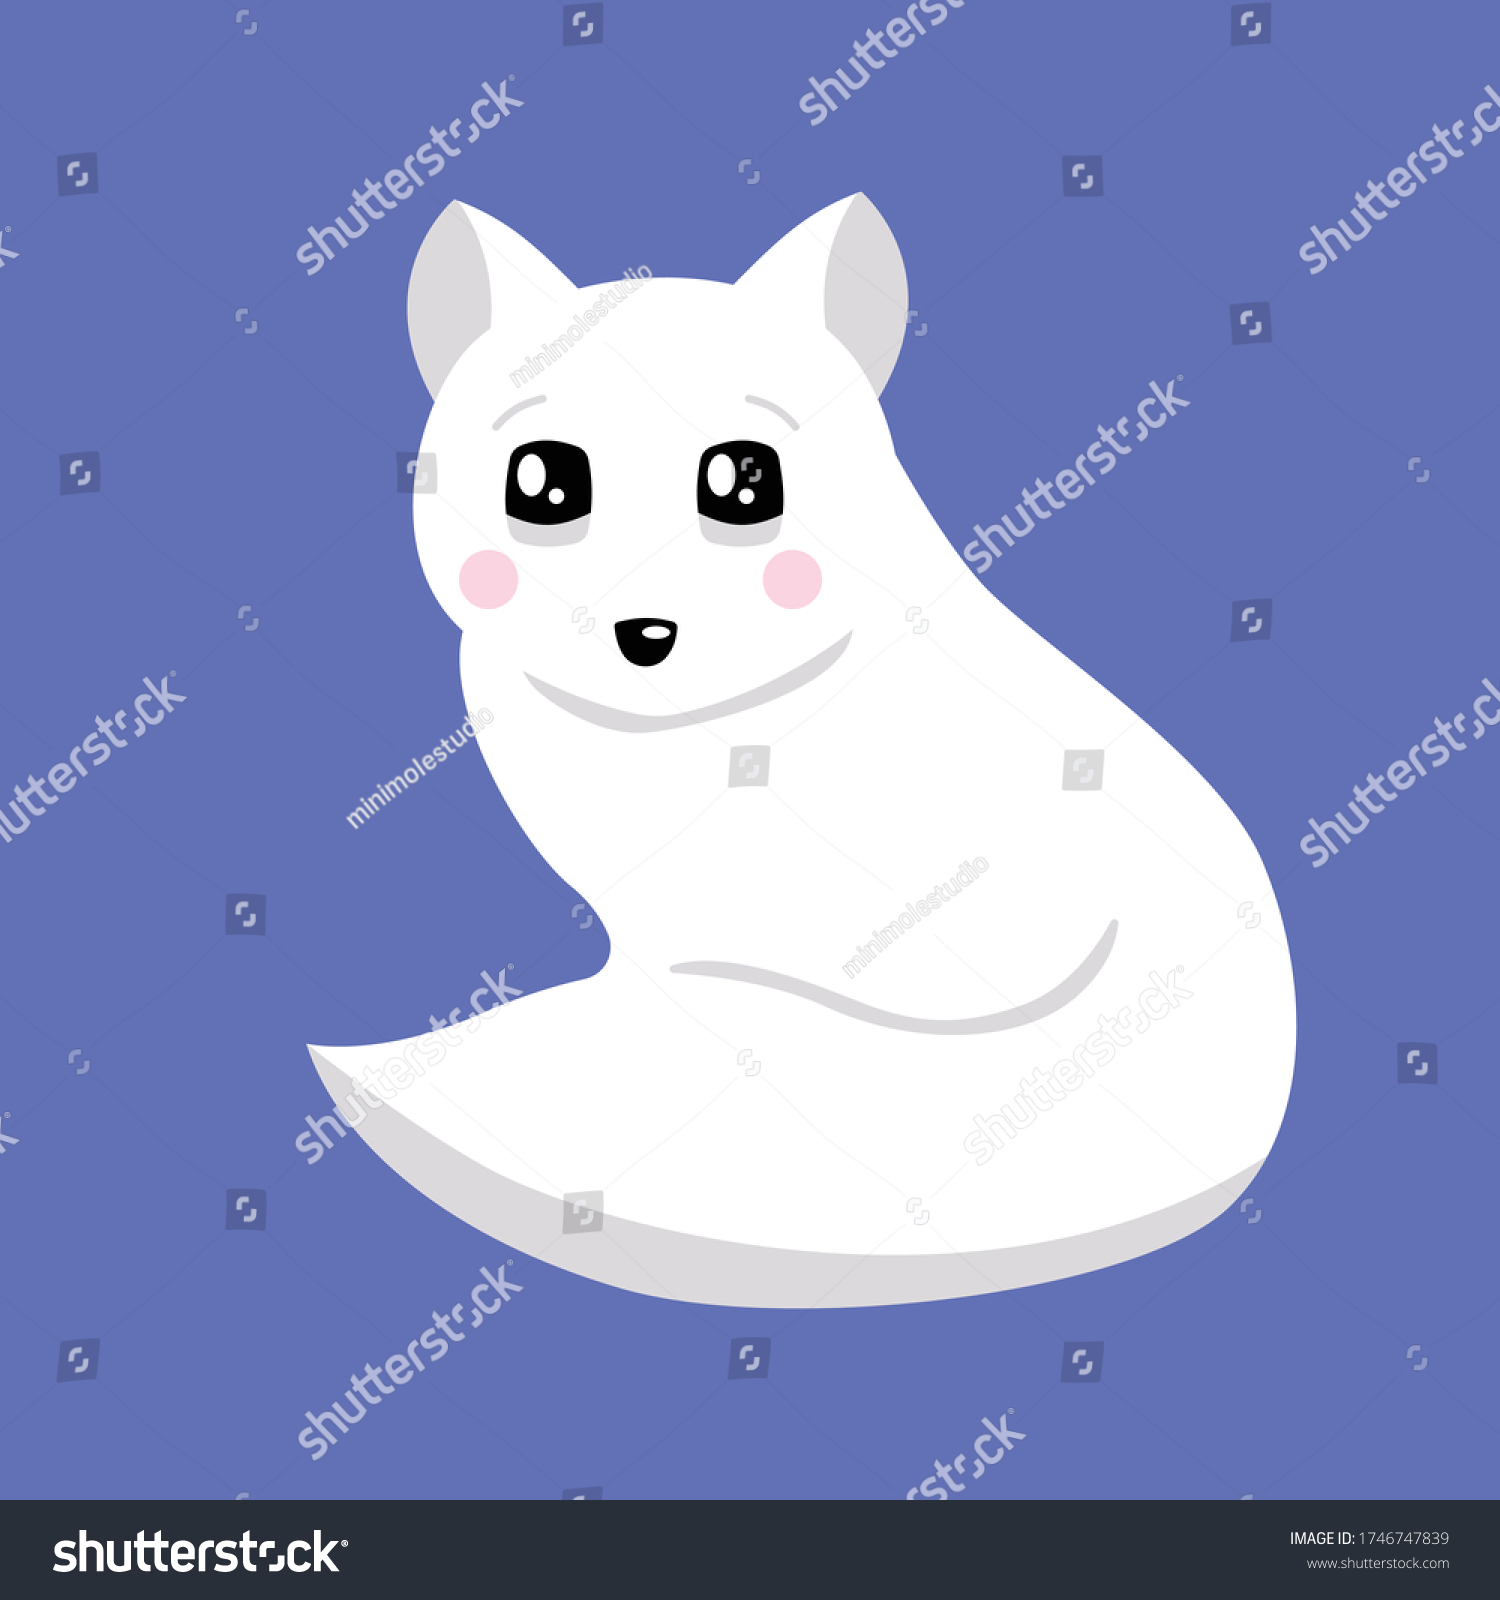 SVG of Vector illustration of an isolated Arctic fox with a cute face. Simple flat style. svg